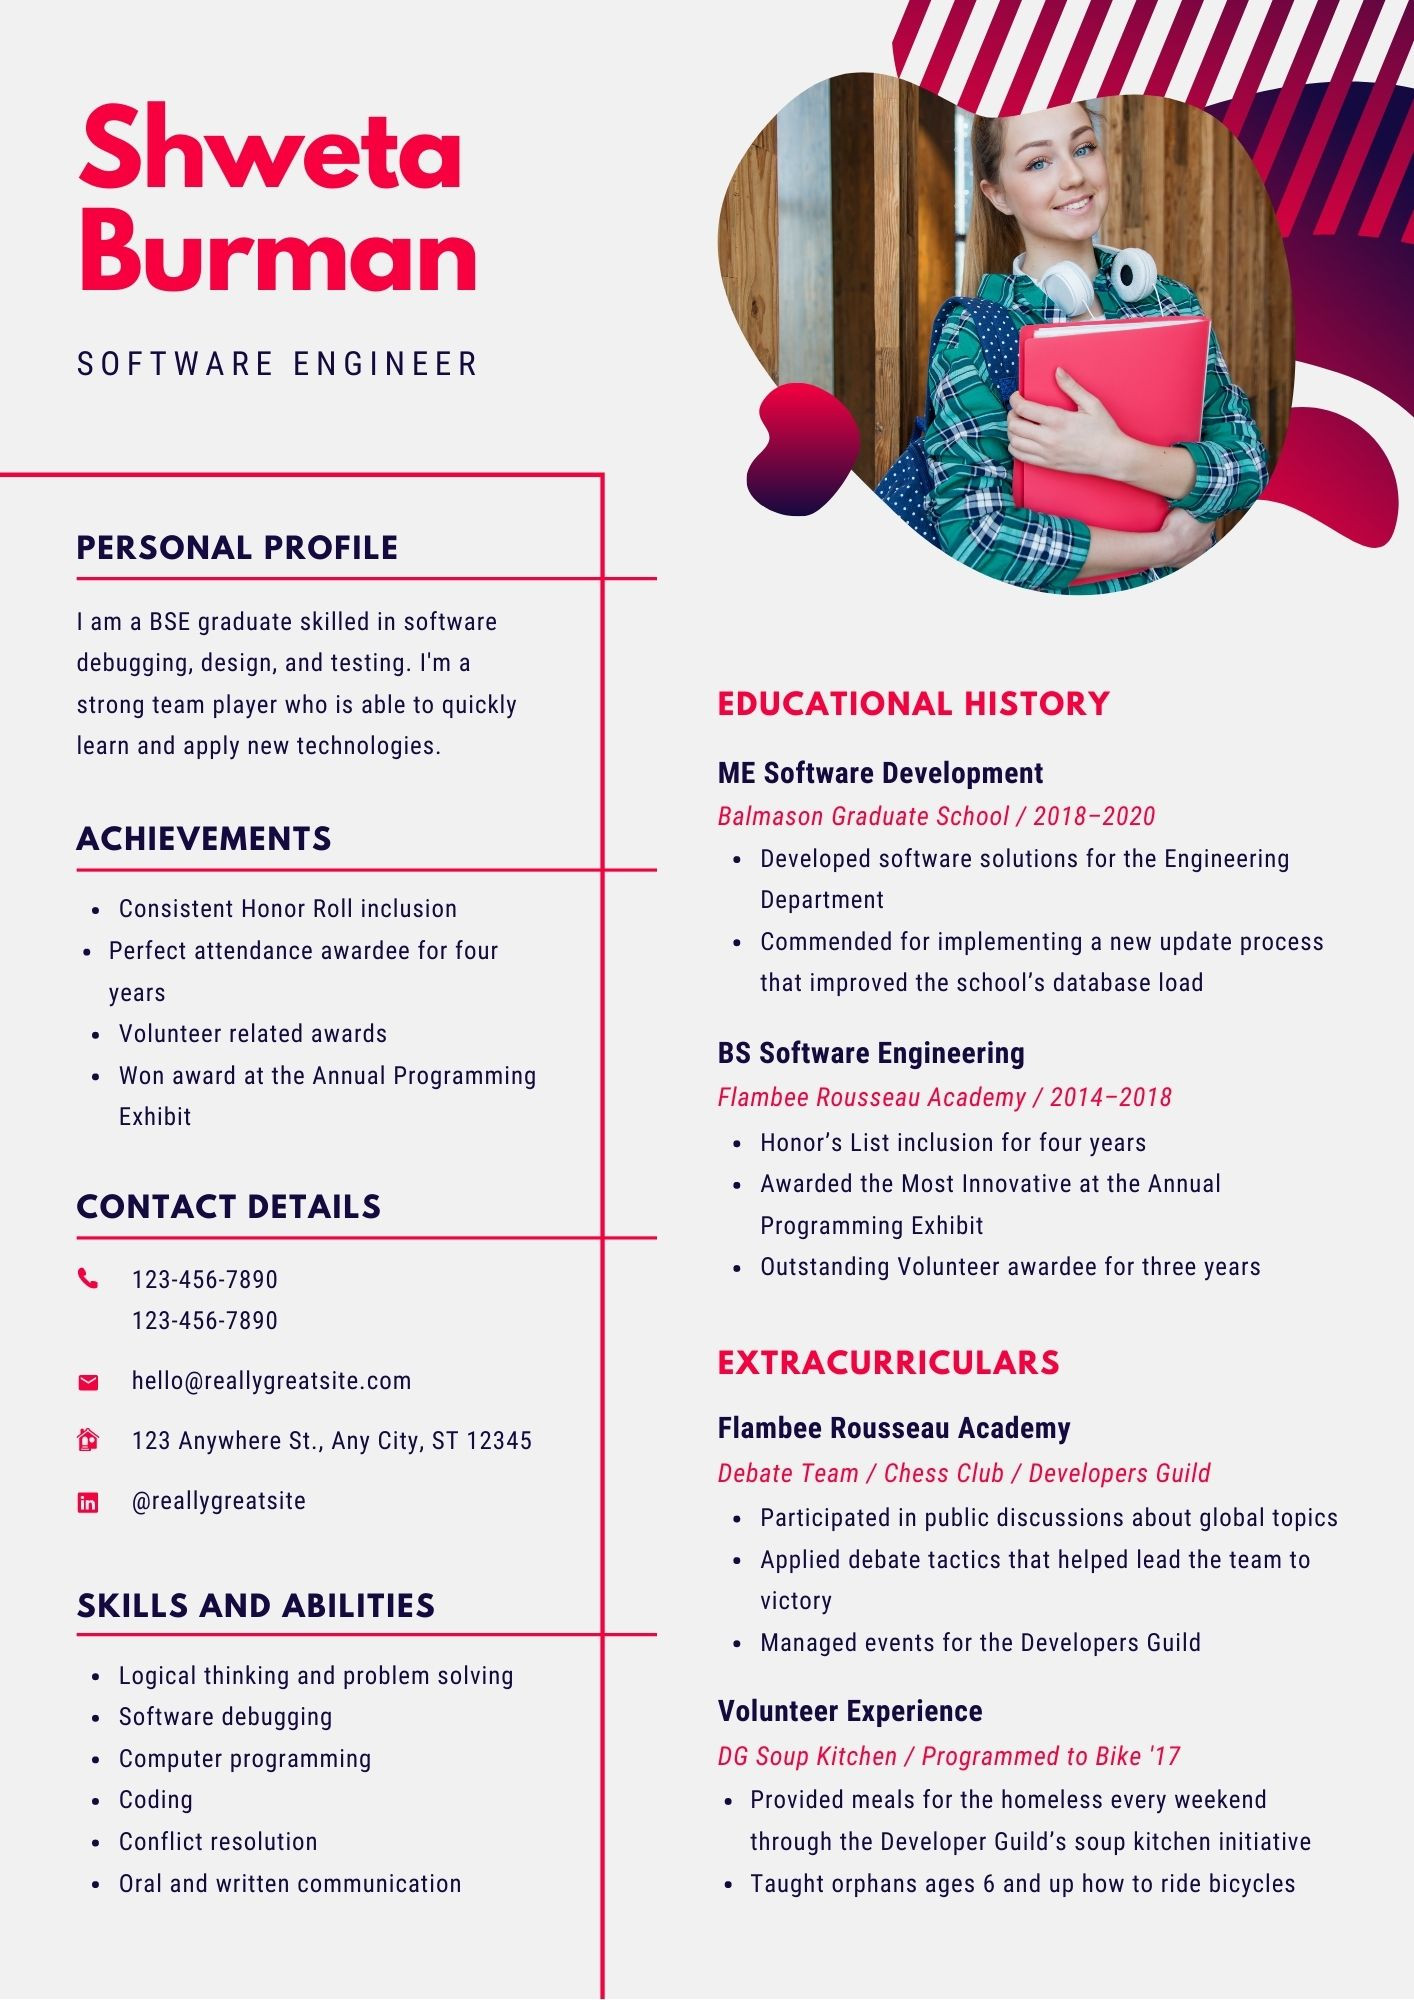 Resume Template for Computer Engineer Fresher software Developer Resume Samples Fresher & Experienced Word, Pdf